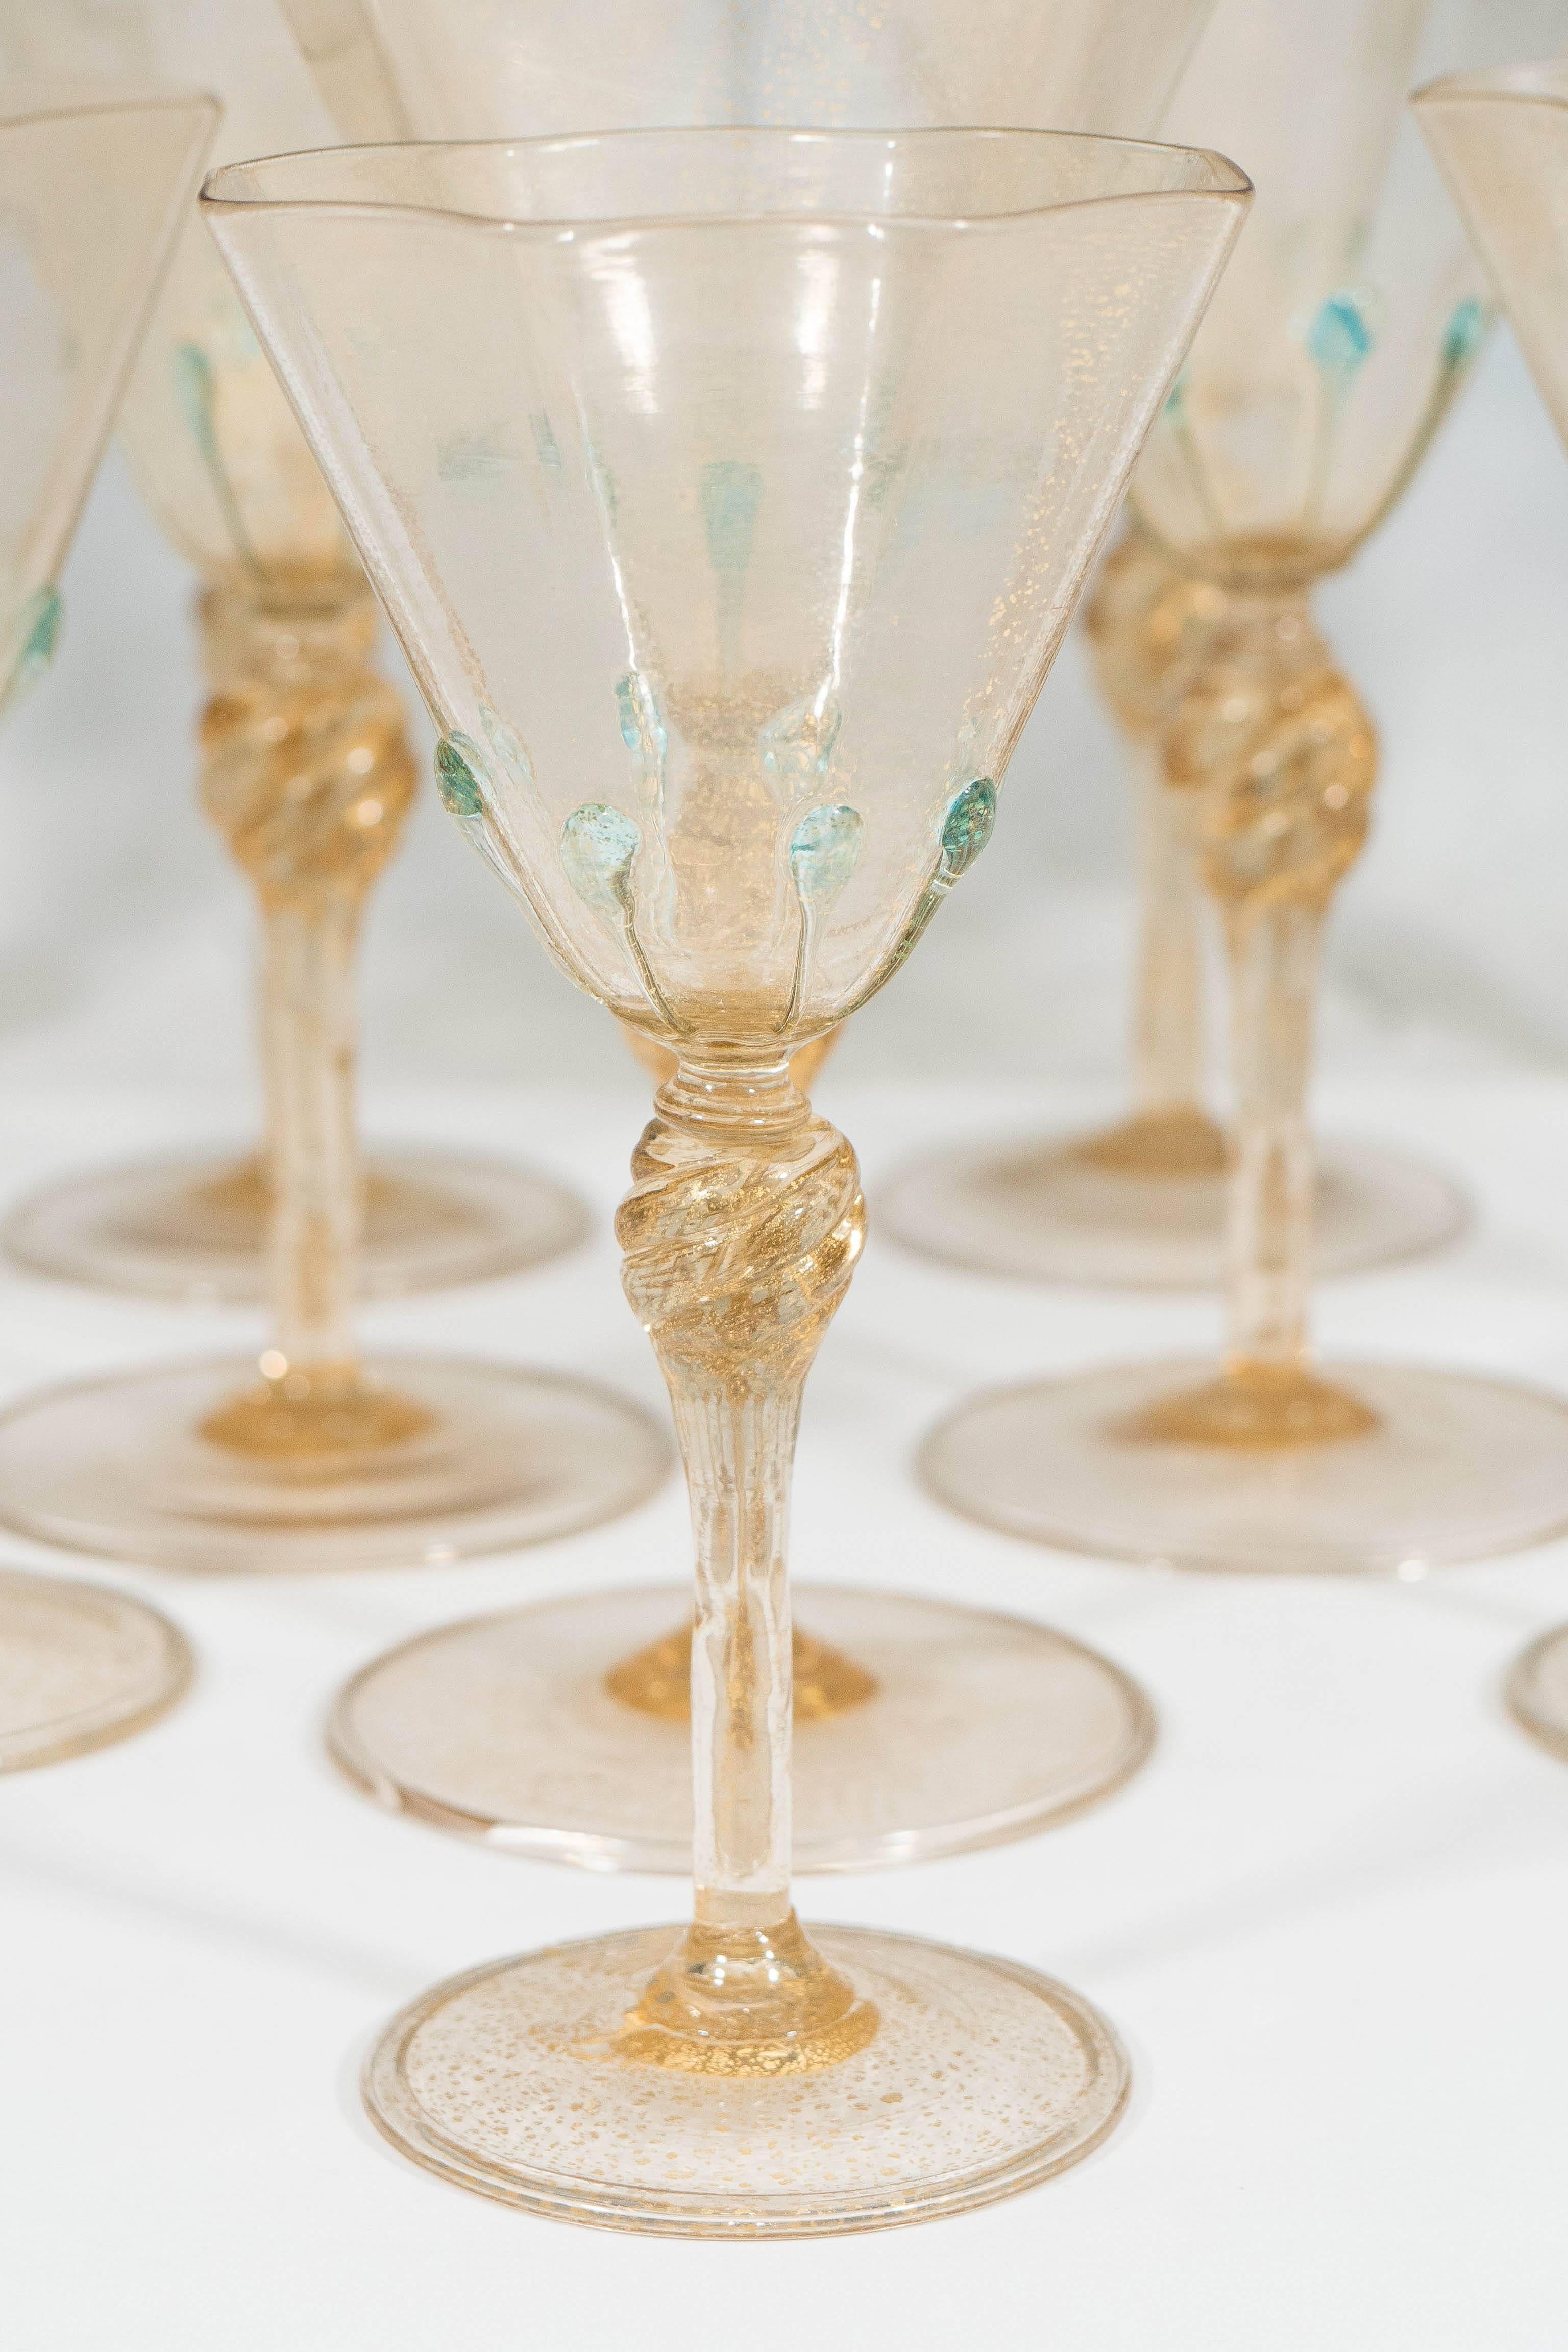 This set of 12 thin walled, handblown glass stems with gold leaf, produced circa 1920s to 1930s by Salviati, includes nine wine goblets and three cordial glasses, with octagonal form rims, decorated with blue drops, on stems with swirled bulbs. The